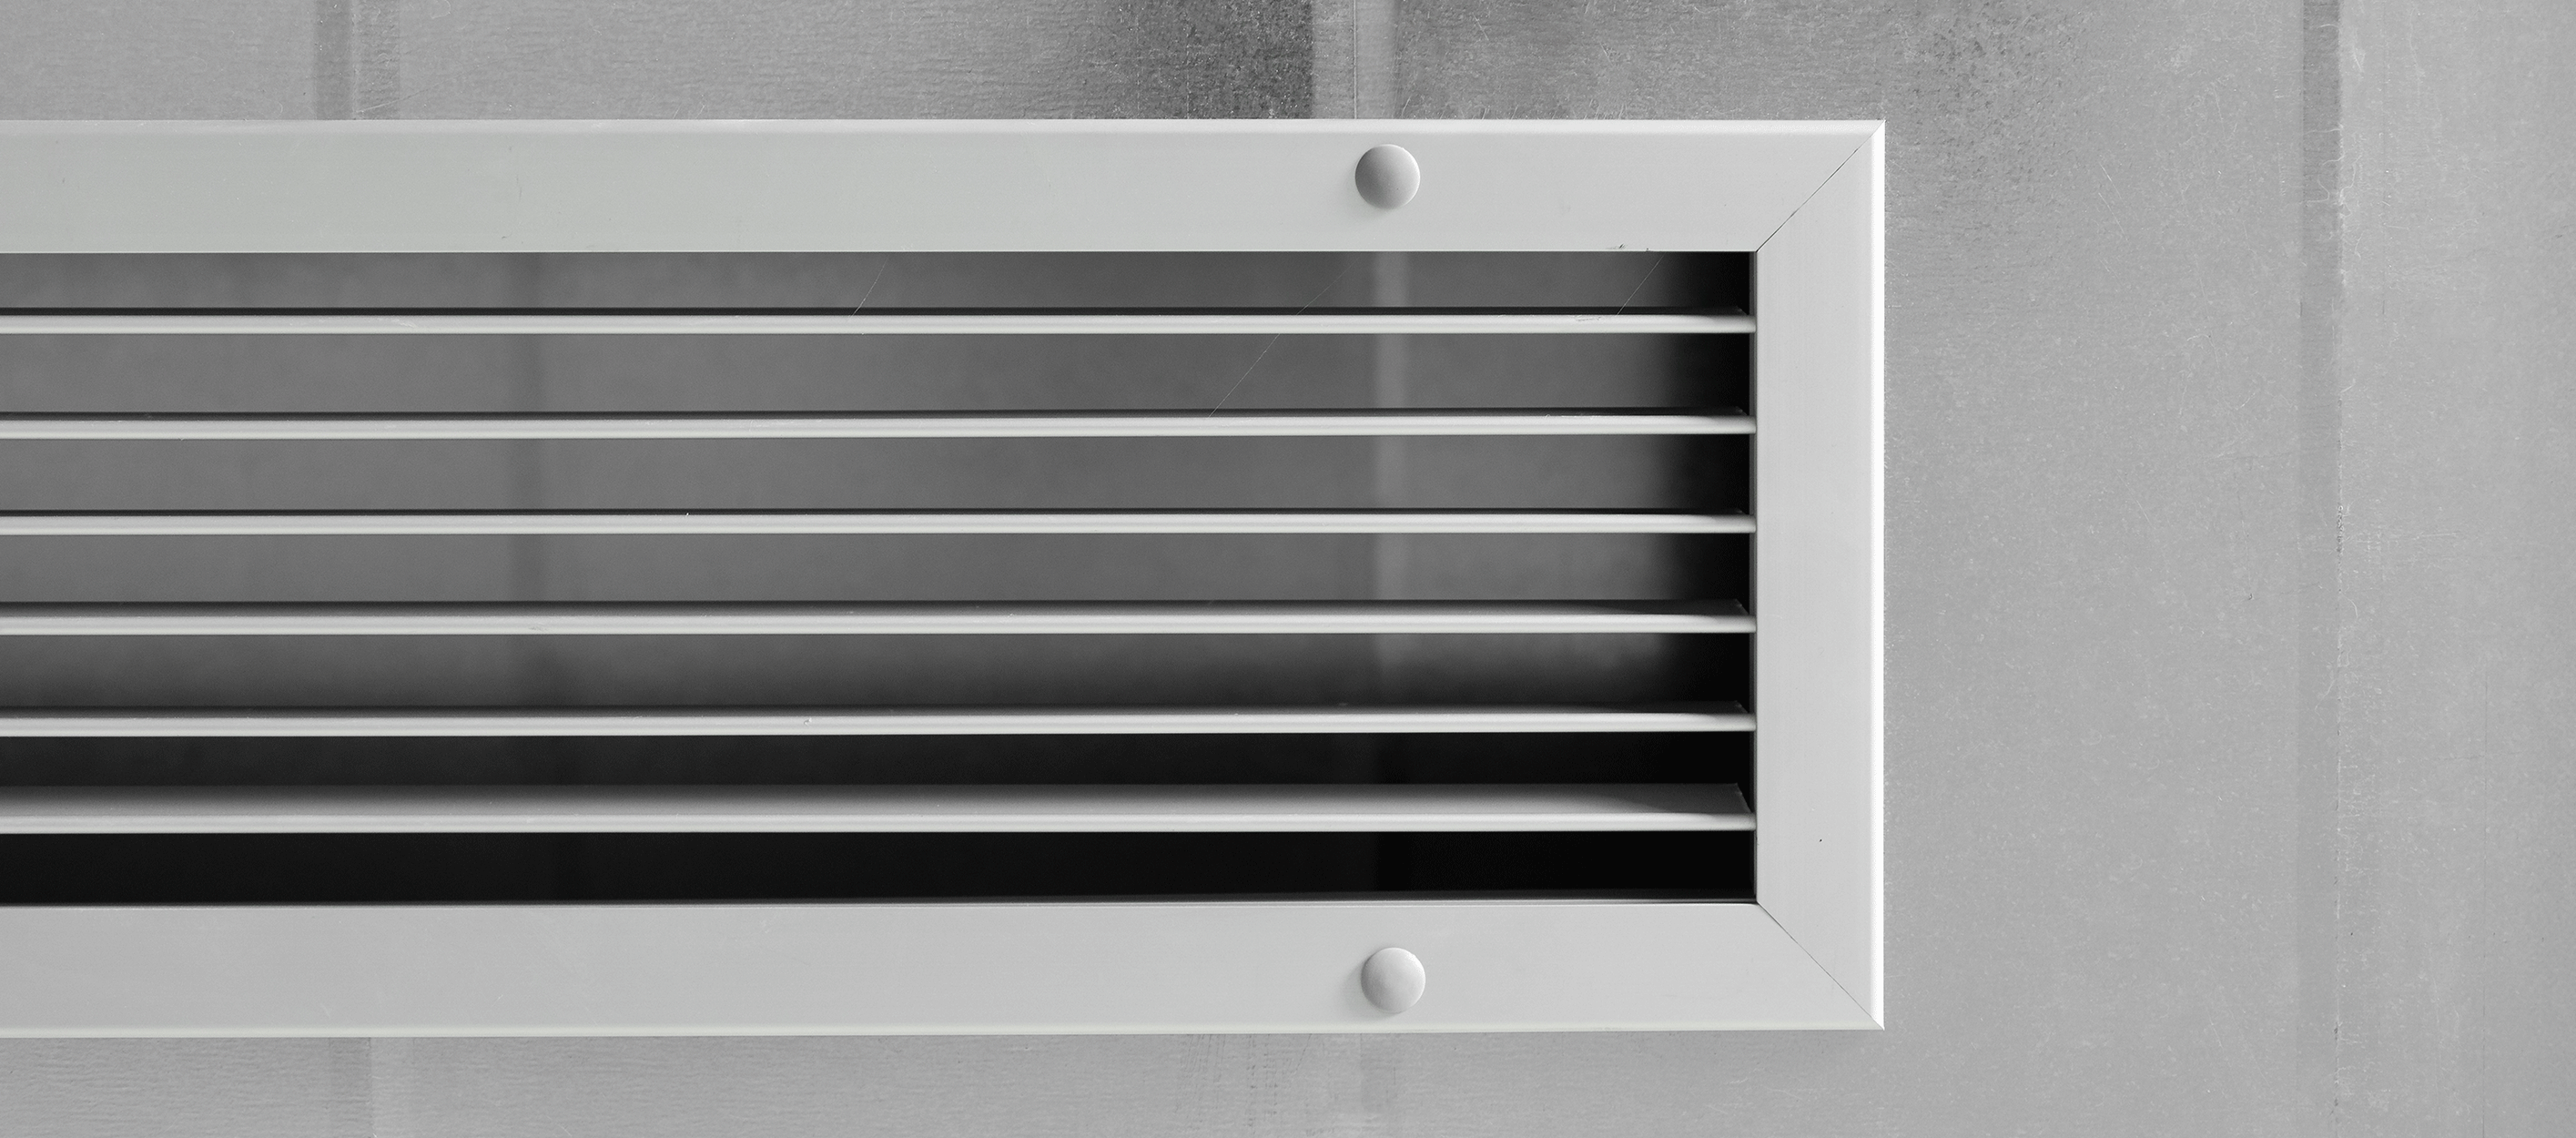 photo of a ventilation grille